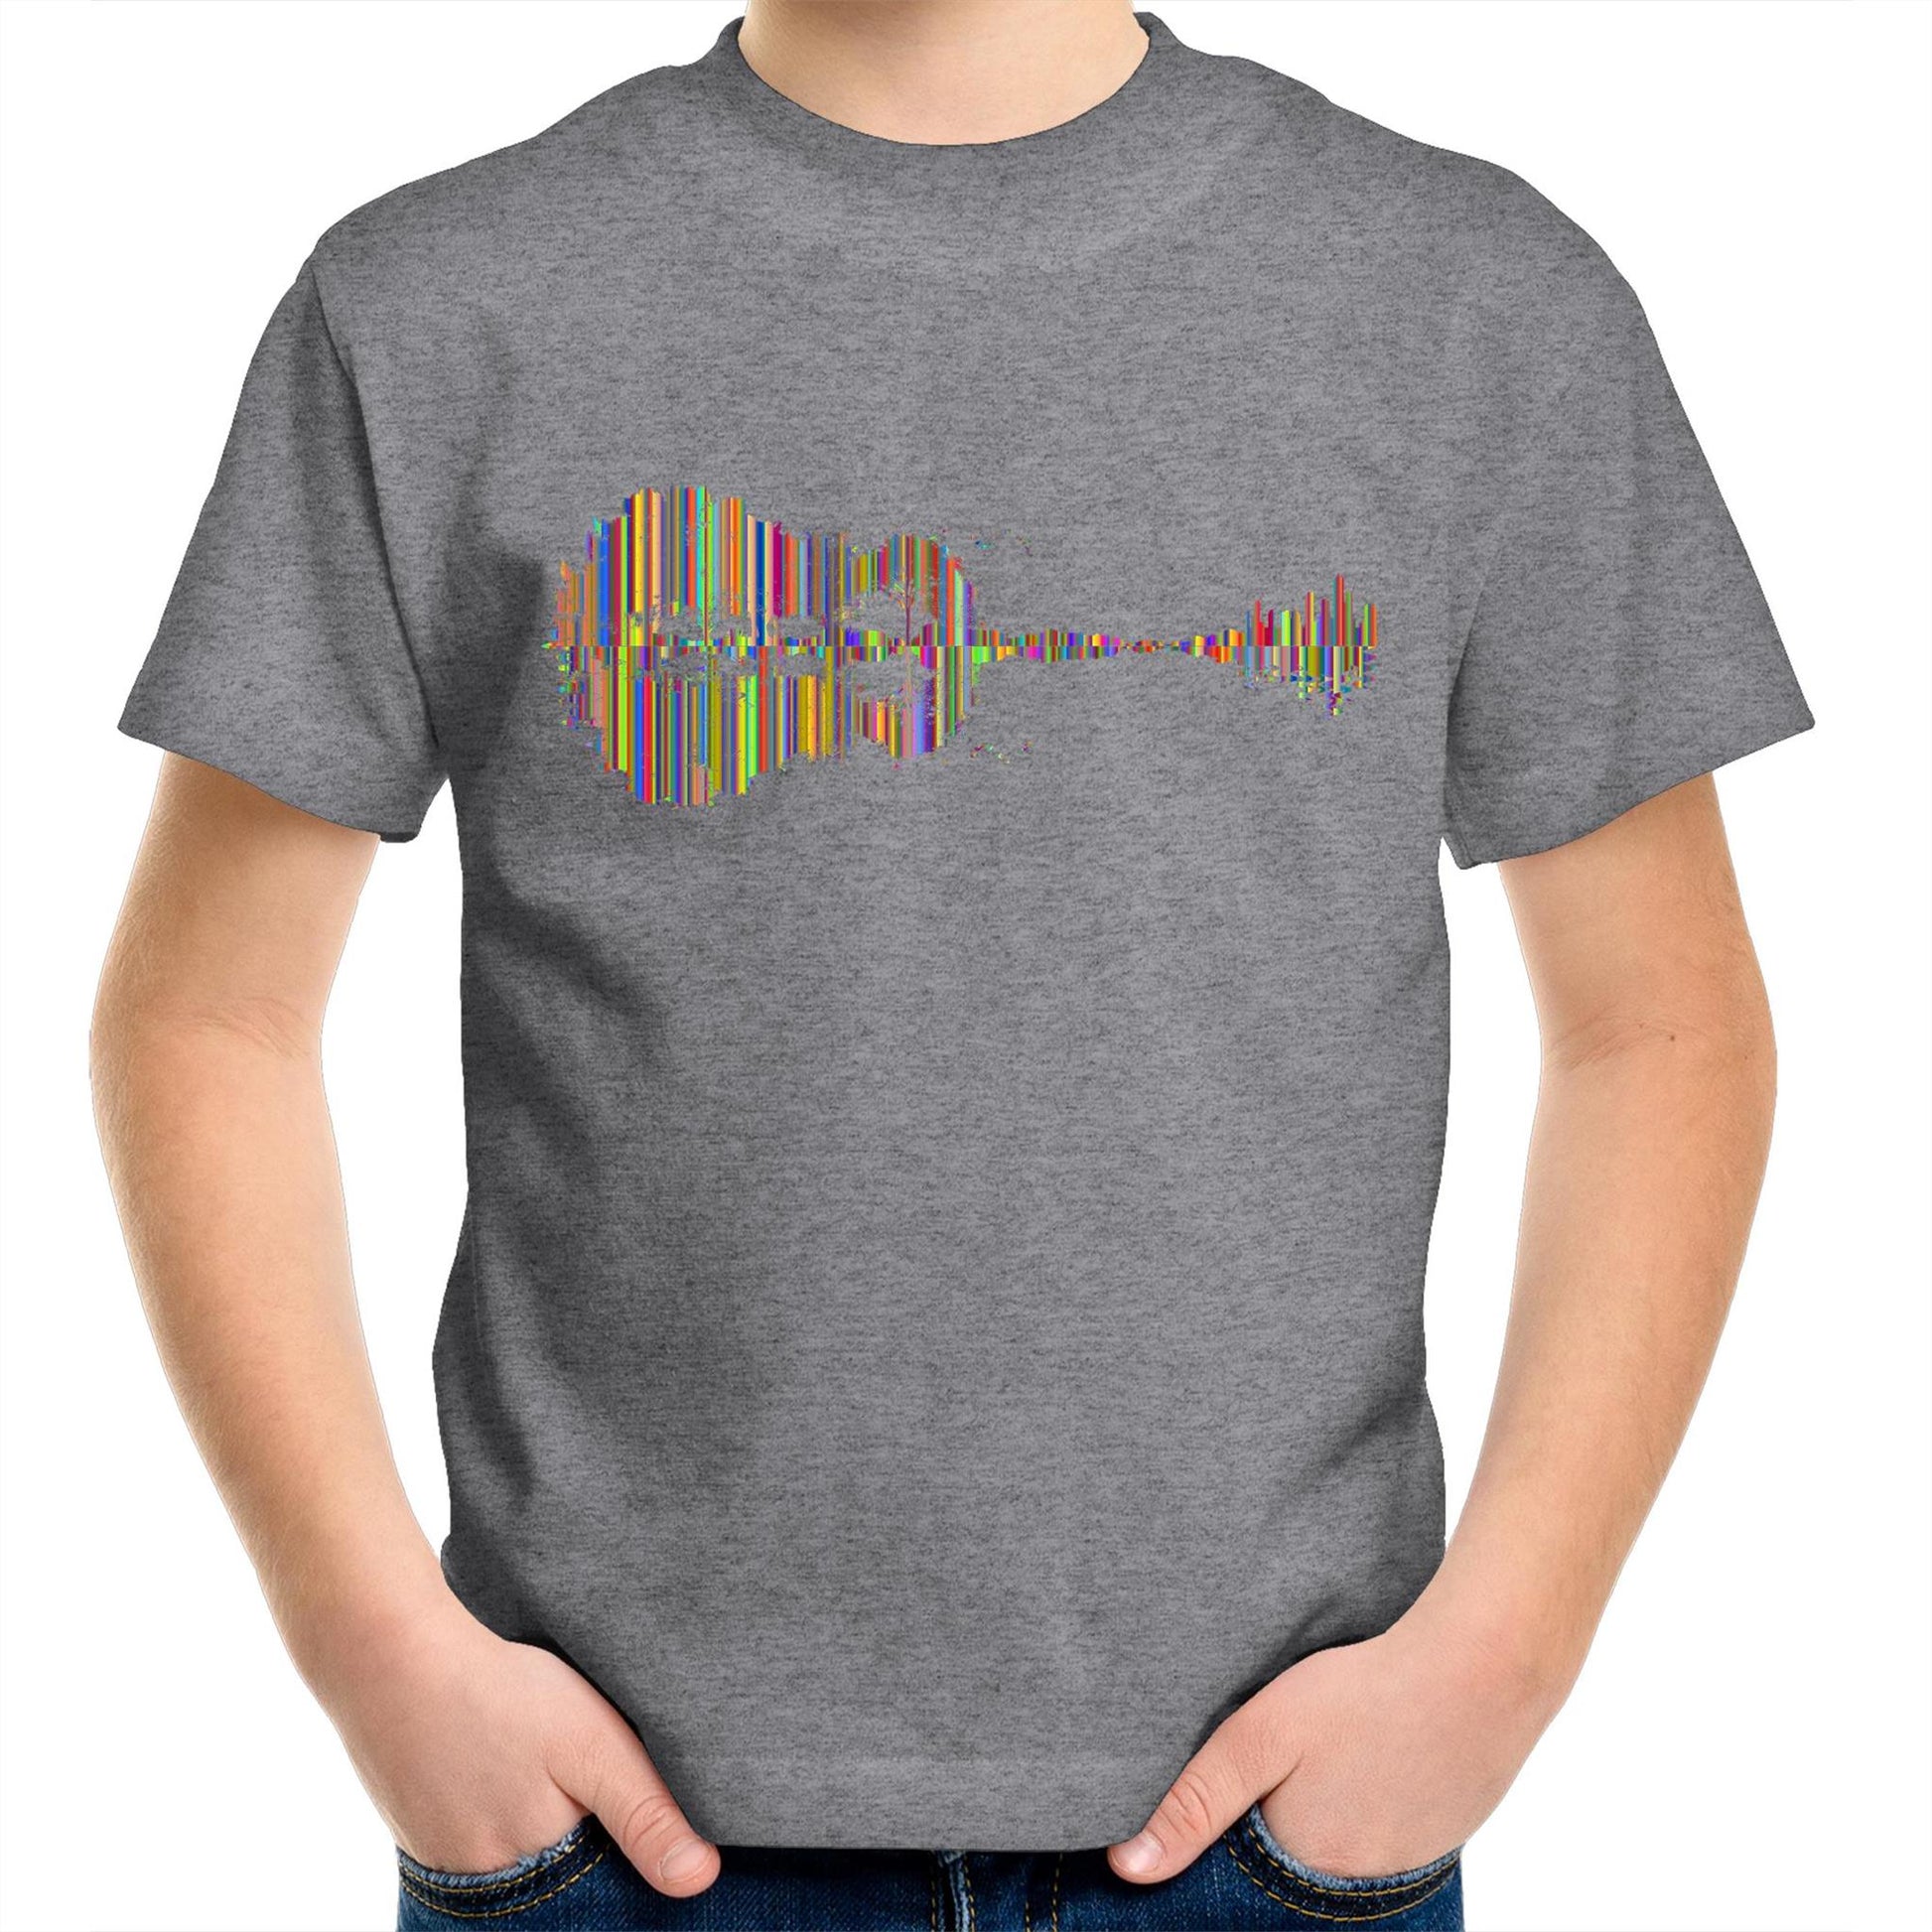 Guitar Reflection In Colour - Kids Youth Crew T-Shirt Grey Marle Kids Youth T-shirt Music